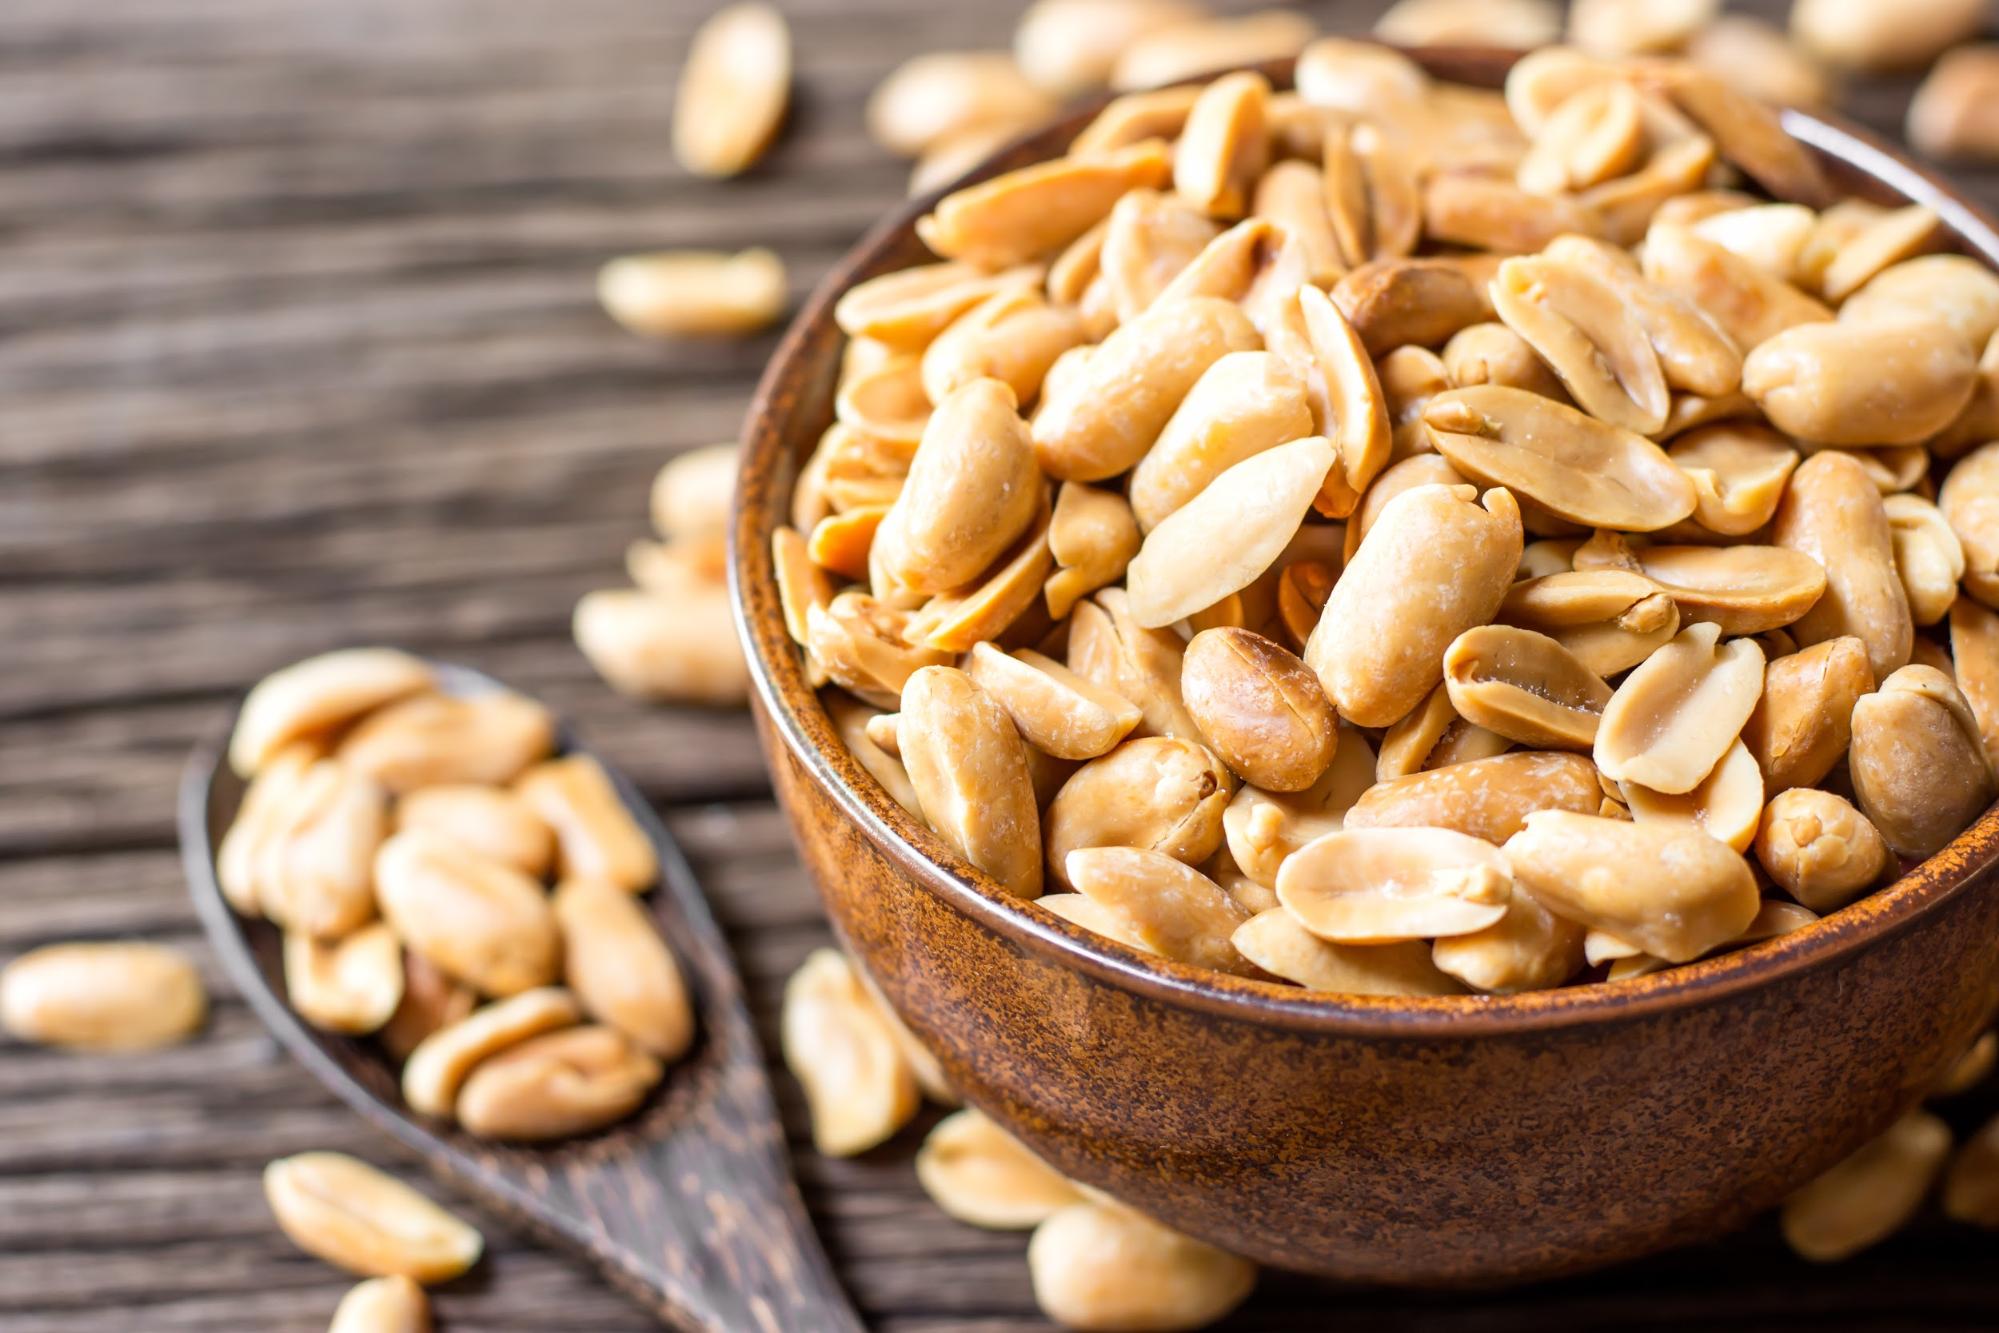 March is National Peanut Month: The (Not) Nutty Facts